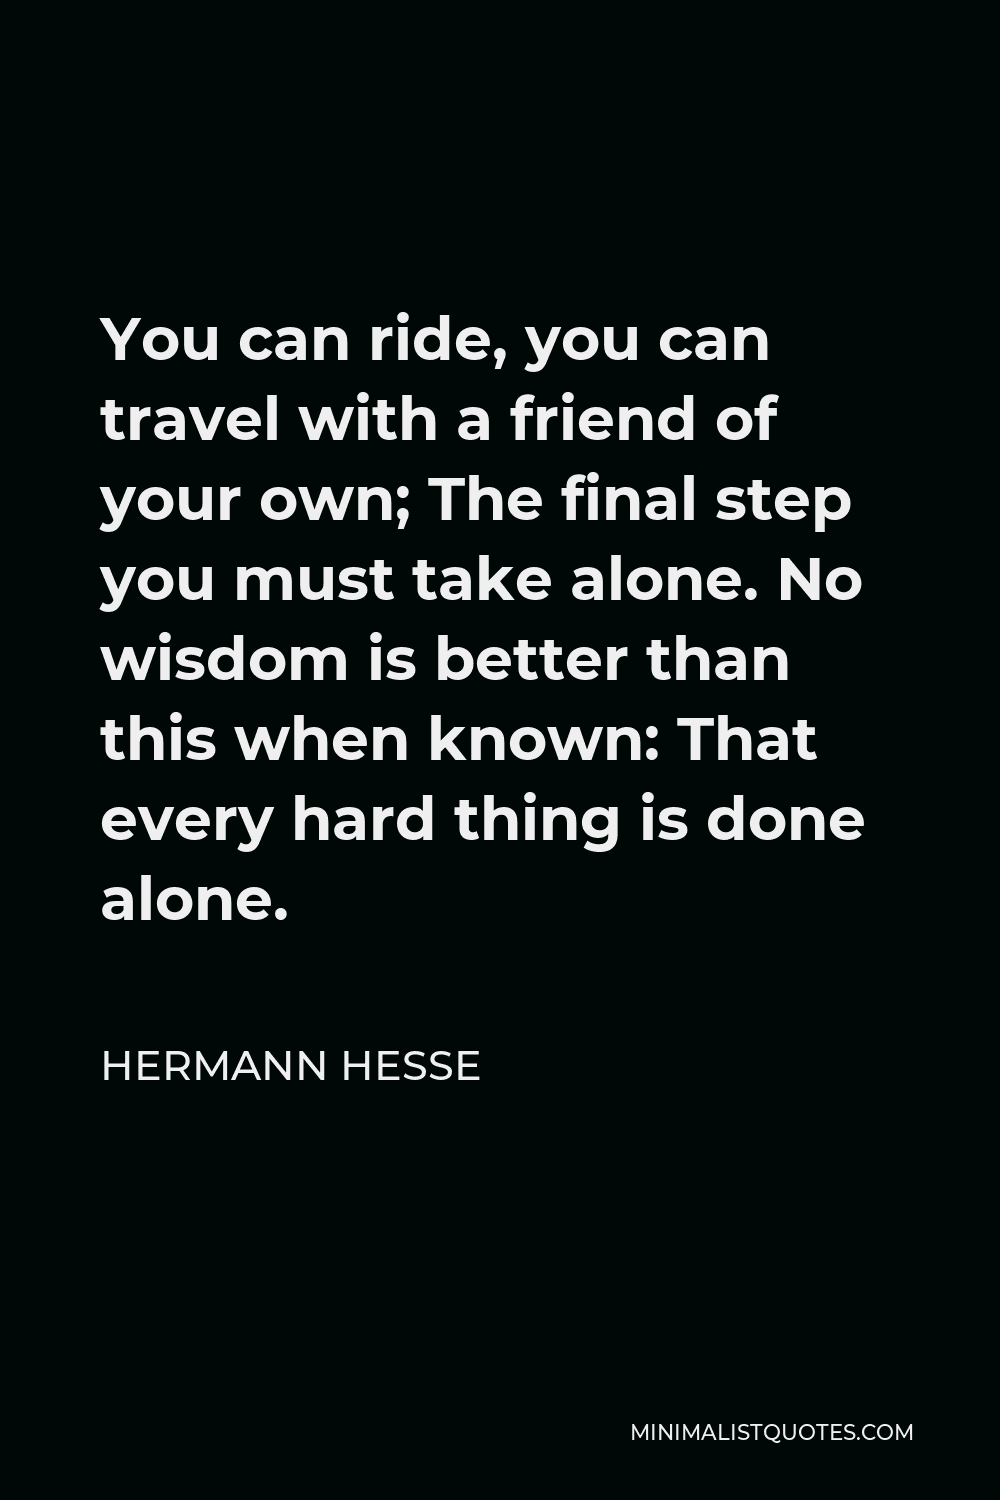 Hermann Hesse Quote - You can ride, you can travel with a friend of your own; The final step you must take alone. No wisdom is better than this when known: That every hard thing is done alone.